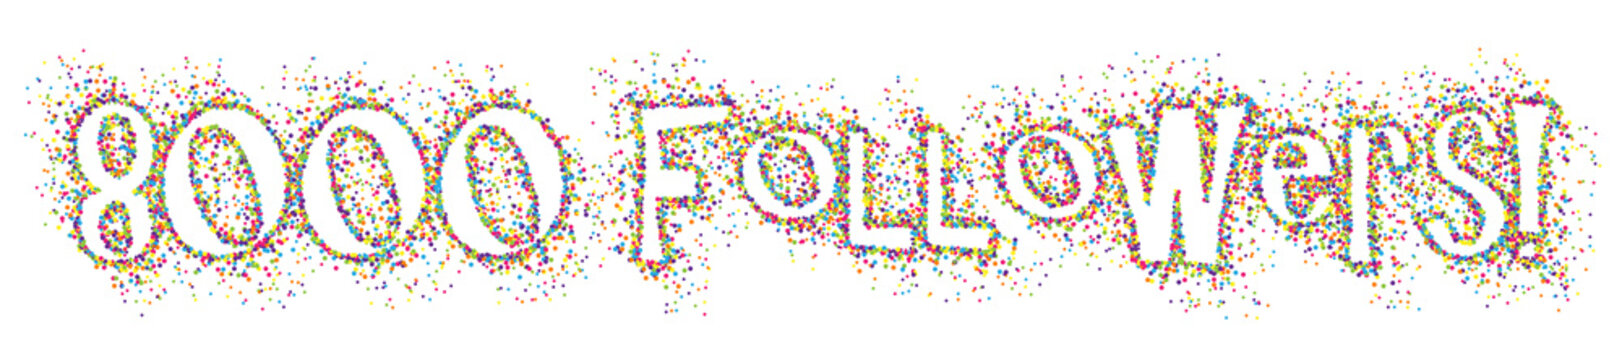 8000 FOLLOWERS colourful dots banner